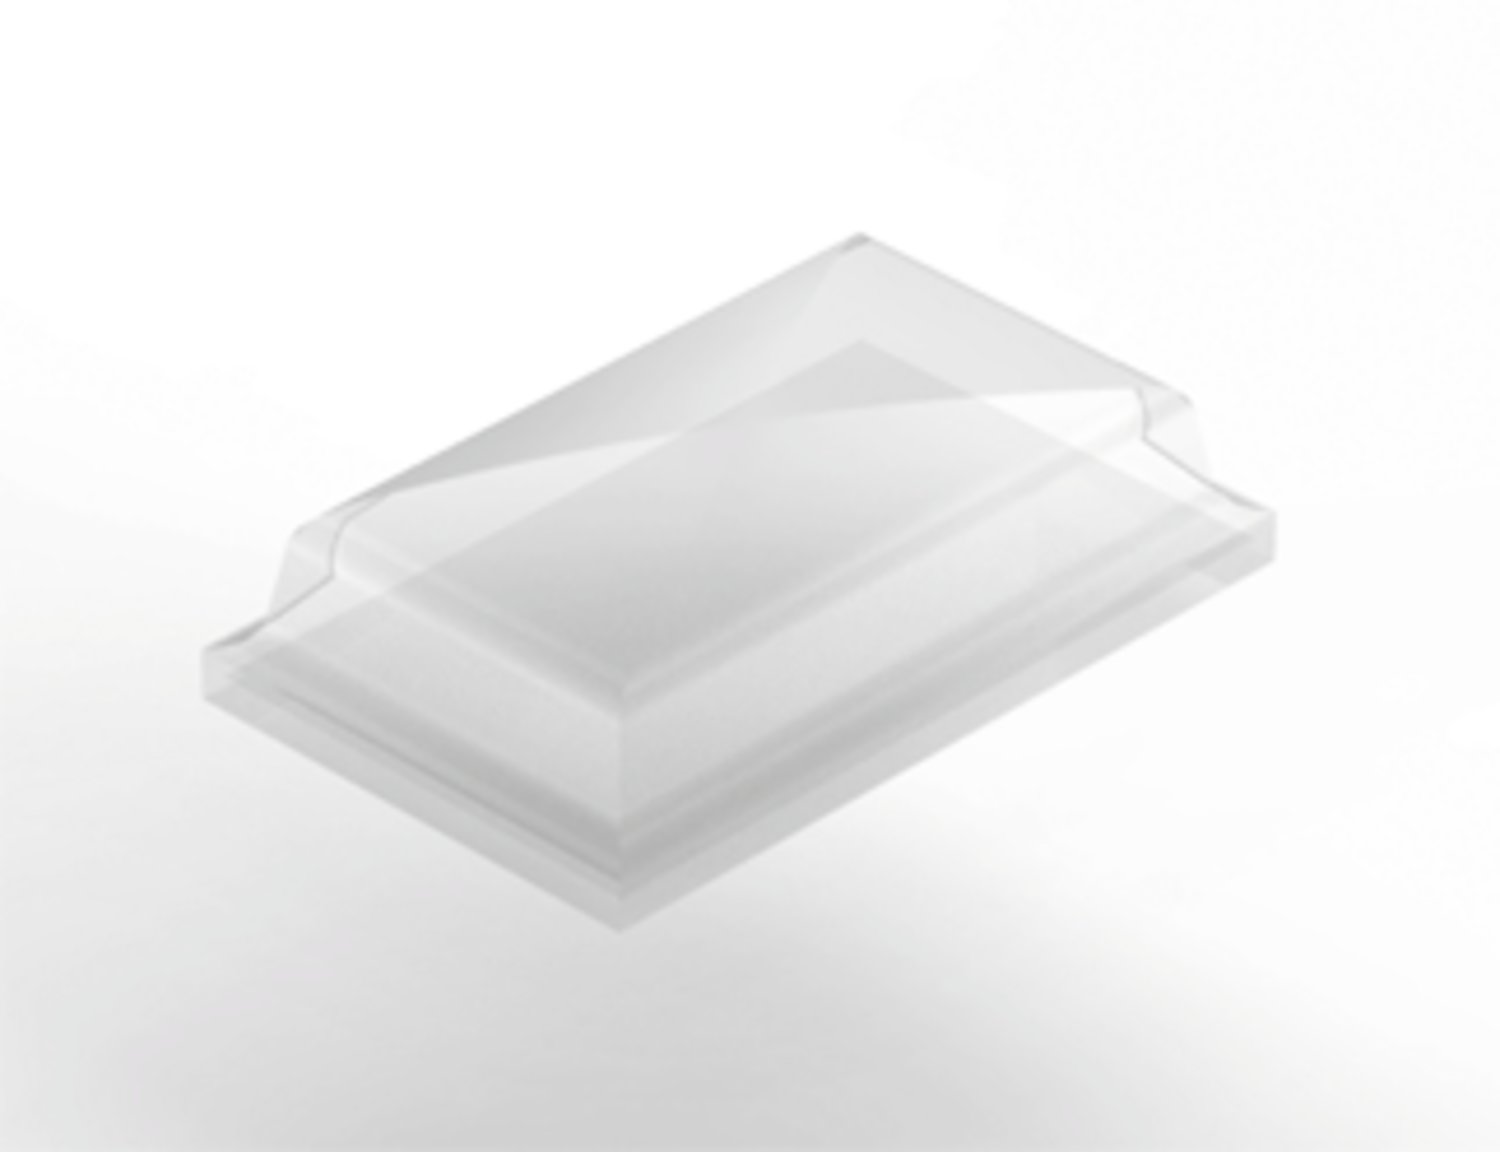 7000052033 - 3M Bumpon Protective Products SJ5394 Clear, 10,000/Case